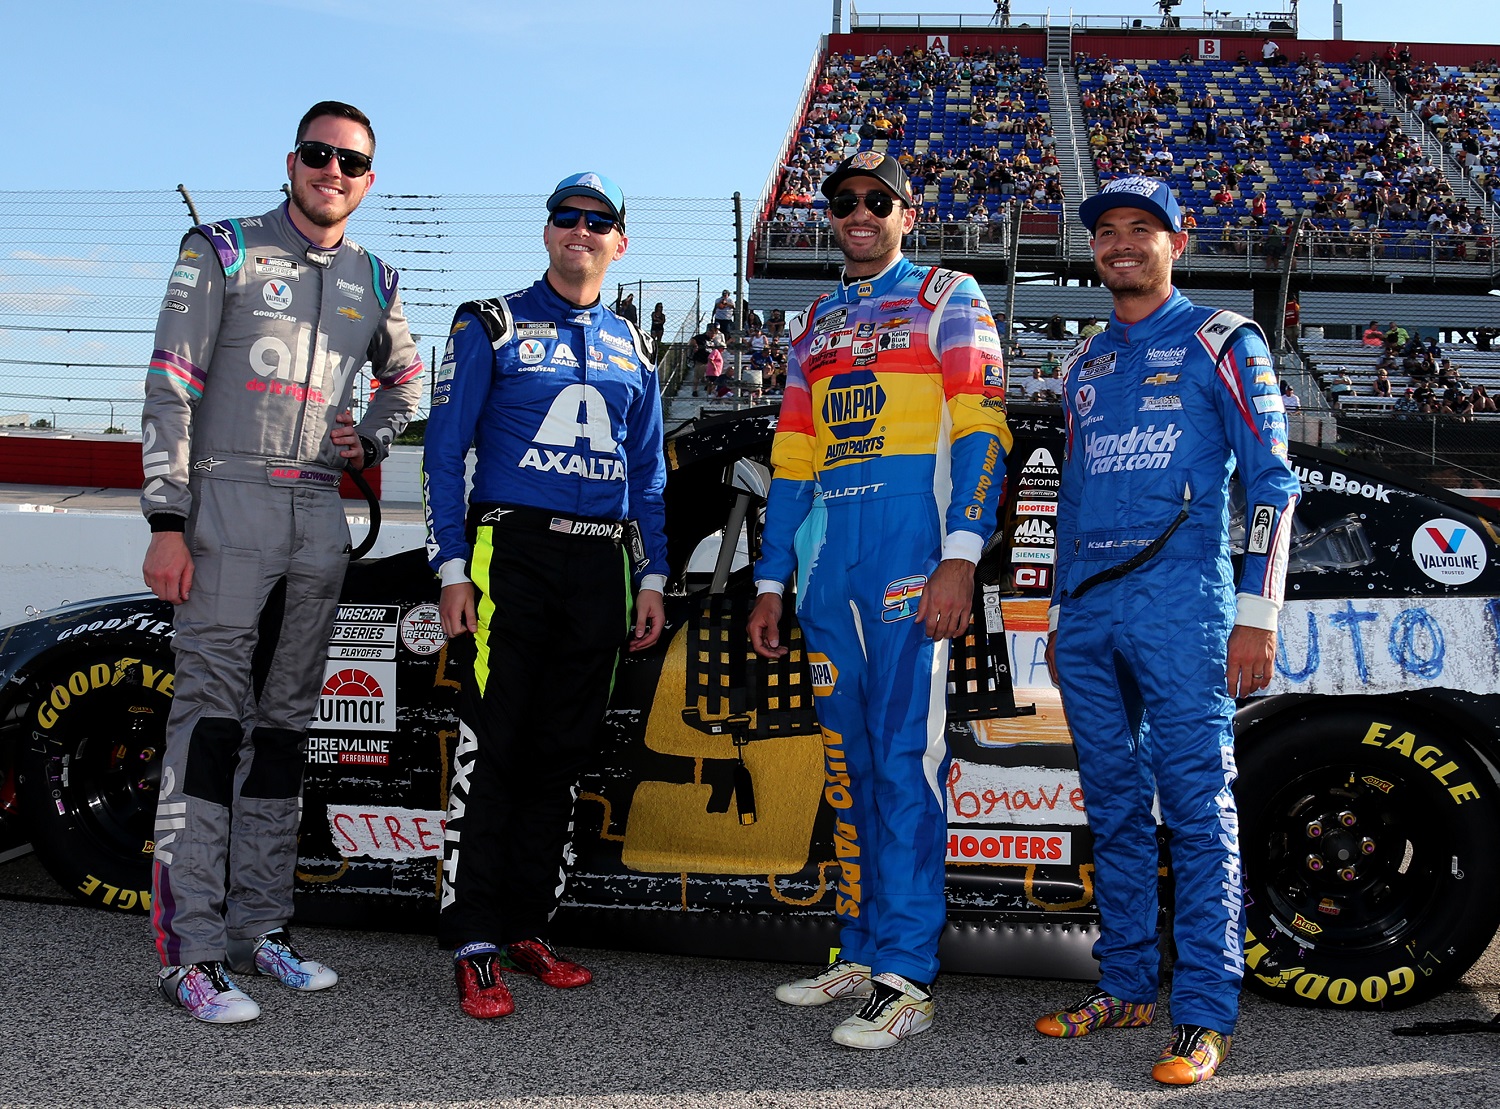 Alex Bowman, William Byron, Chase Elliott, and Kyle Larson,of Hendrick Motorsports get together during the running of the NASCAR Cup Series Cook Out Southern 500 on Sept. 5, 2021.